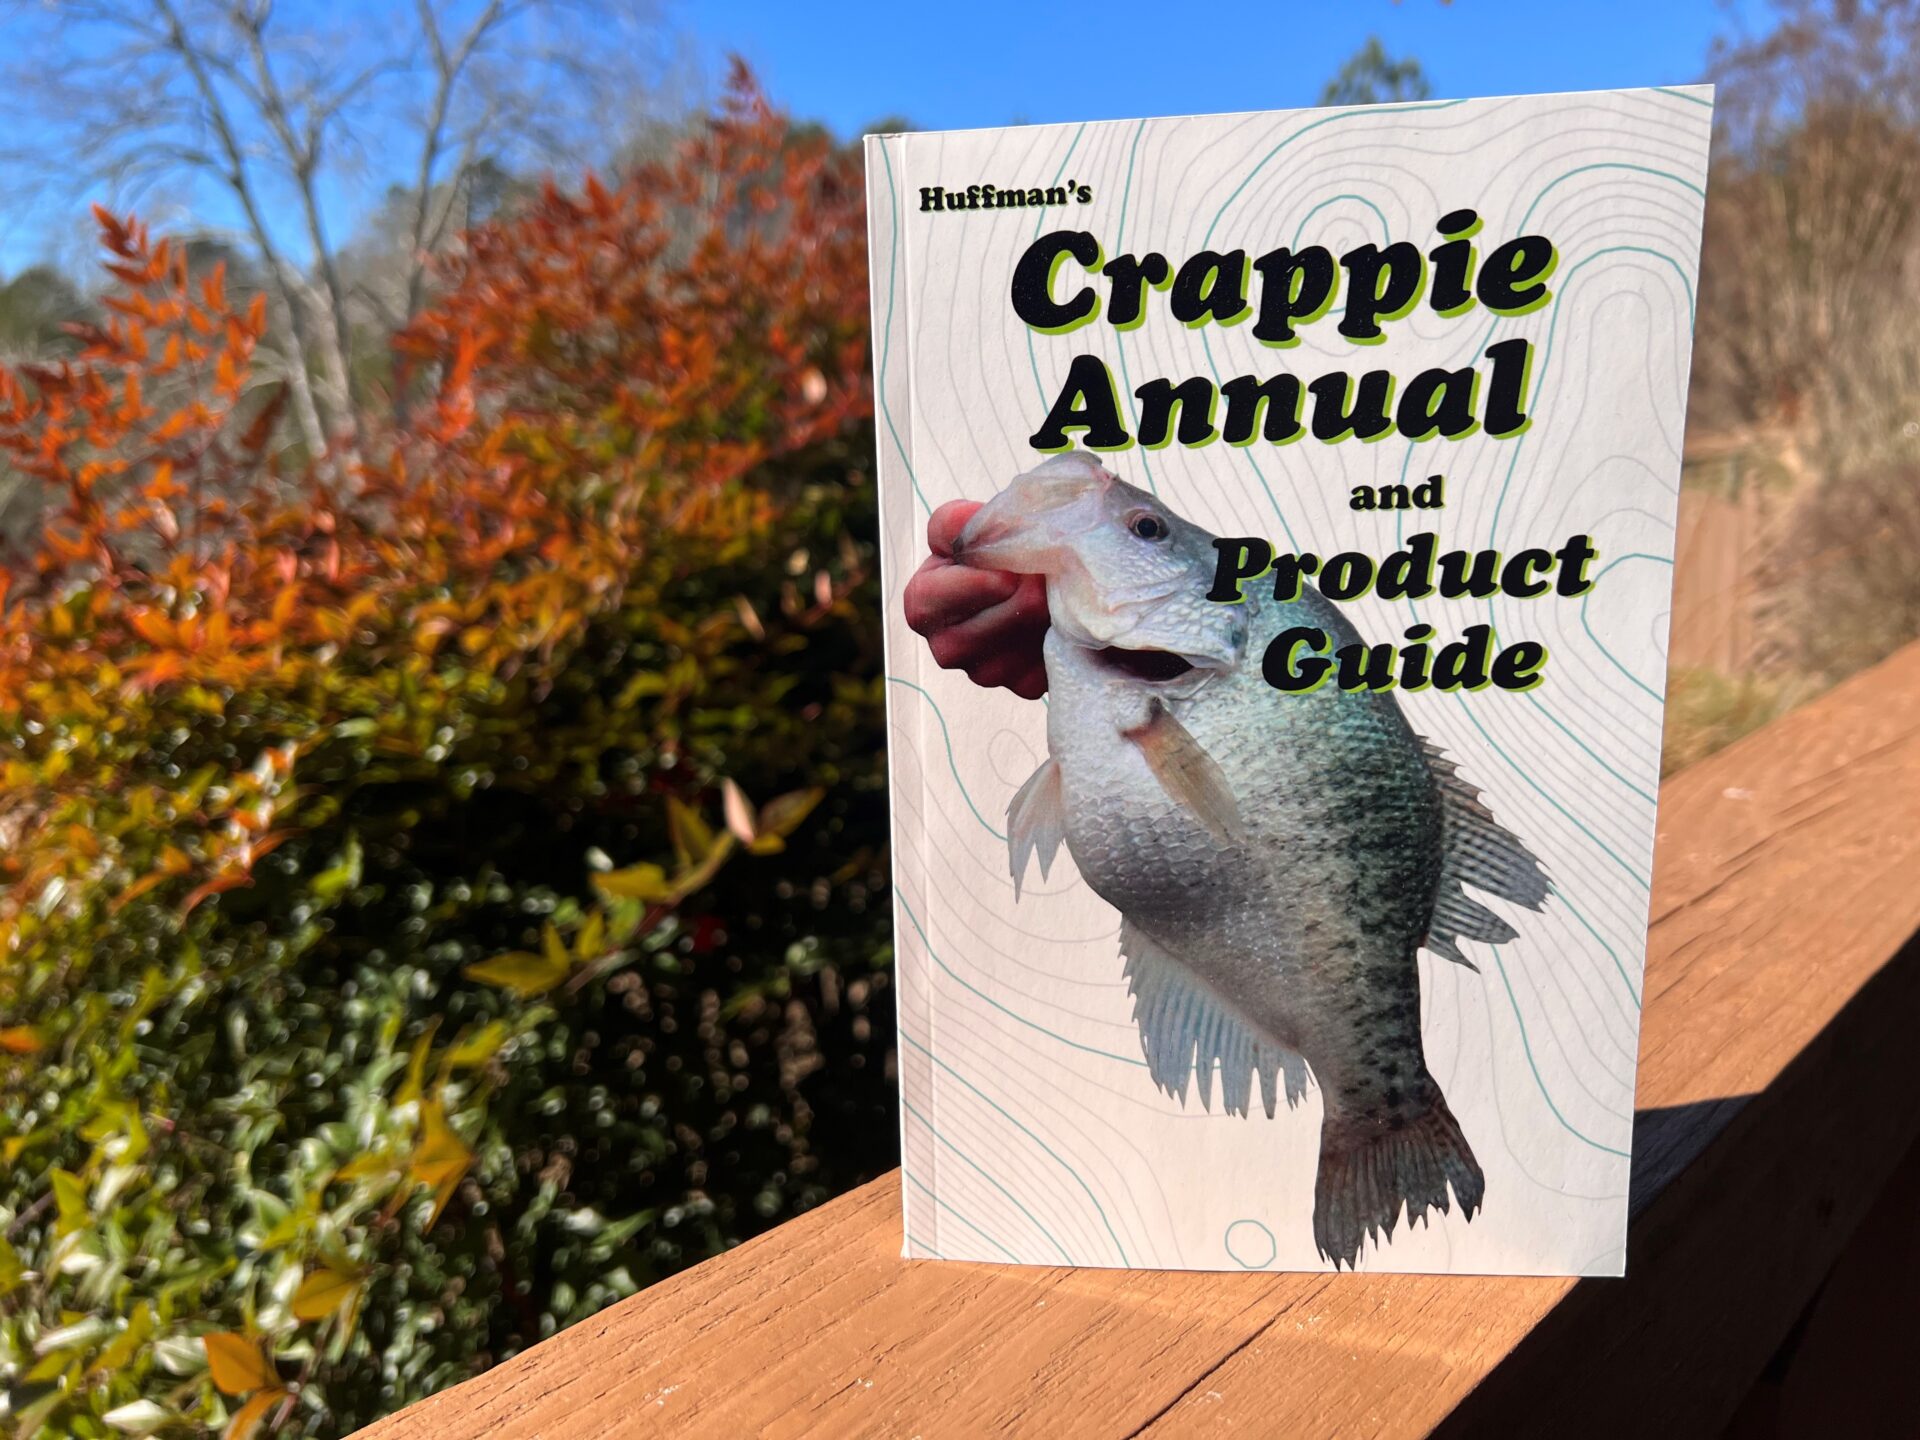 Huffman's Crappie Annual Released - Crappie Now